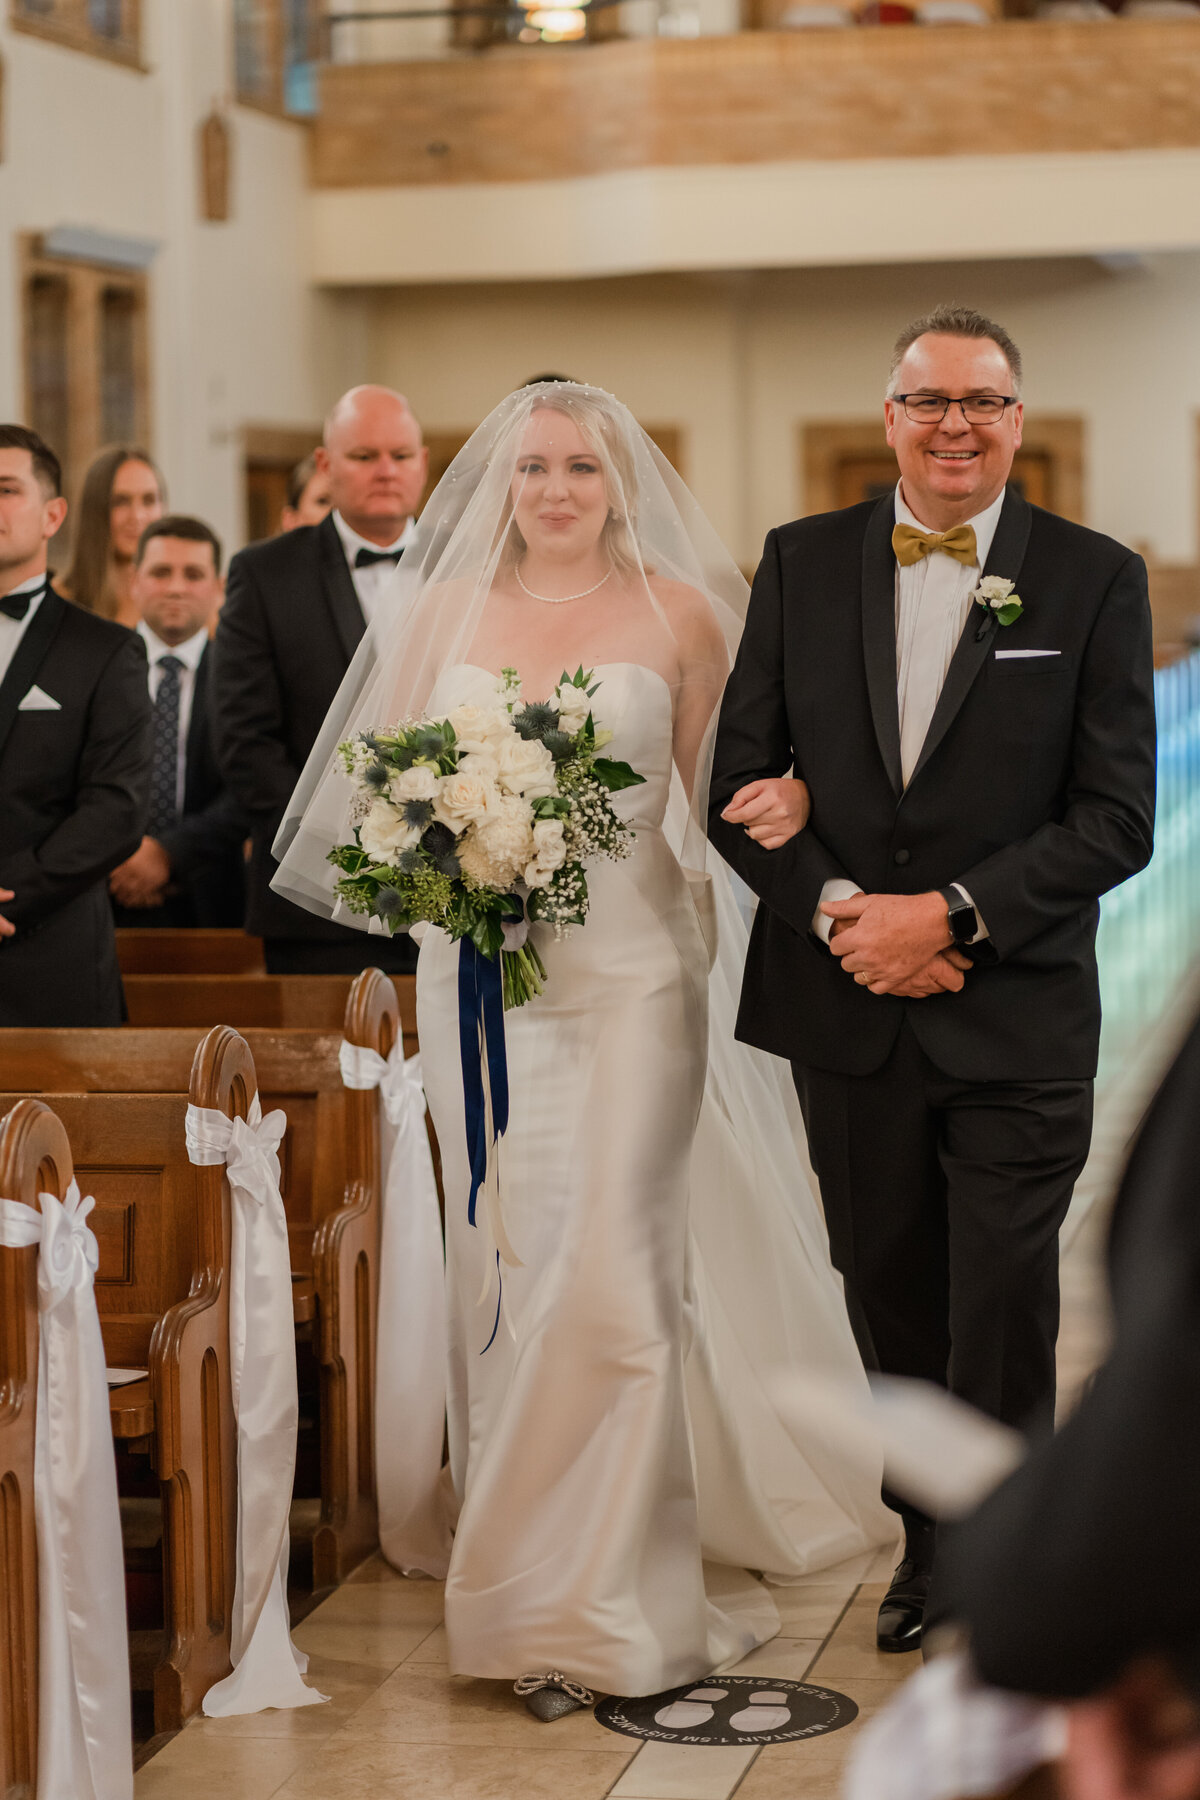 Catholic wedding blessings in Canberra